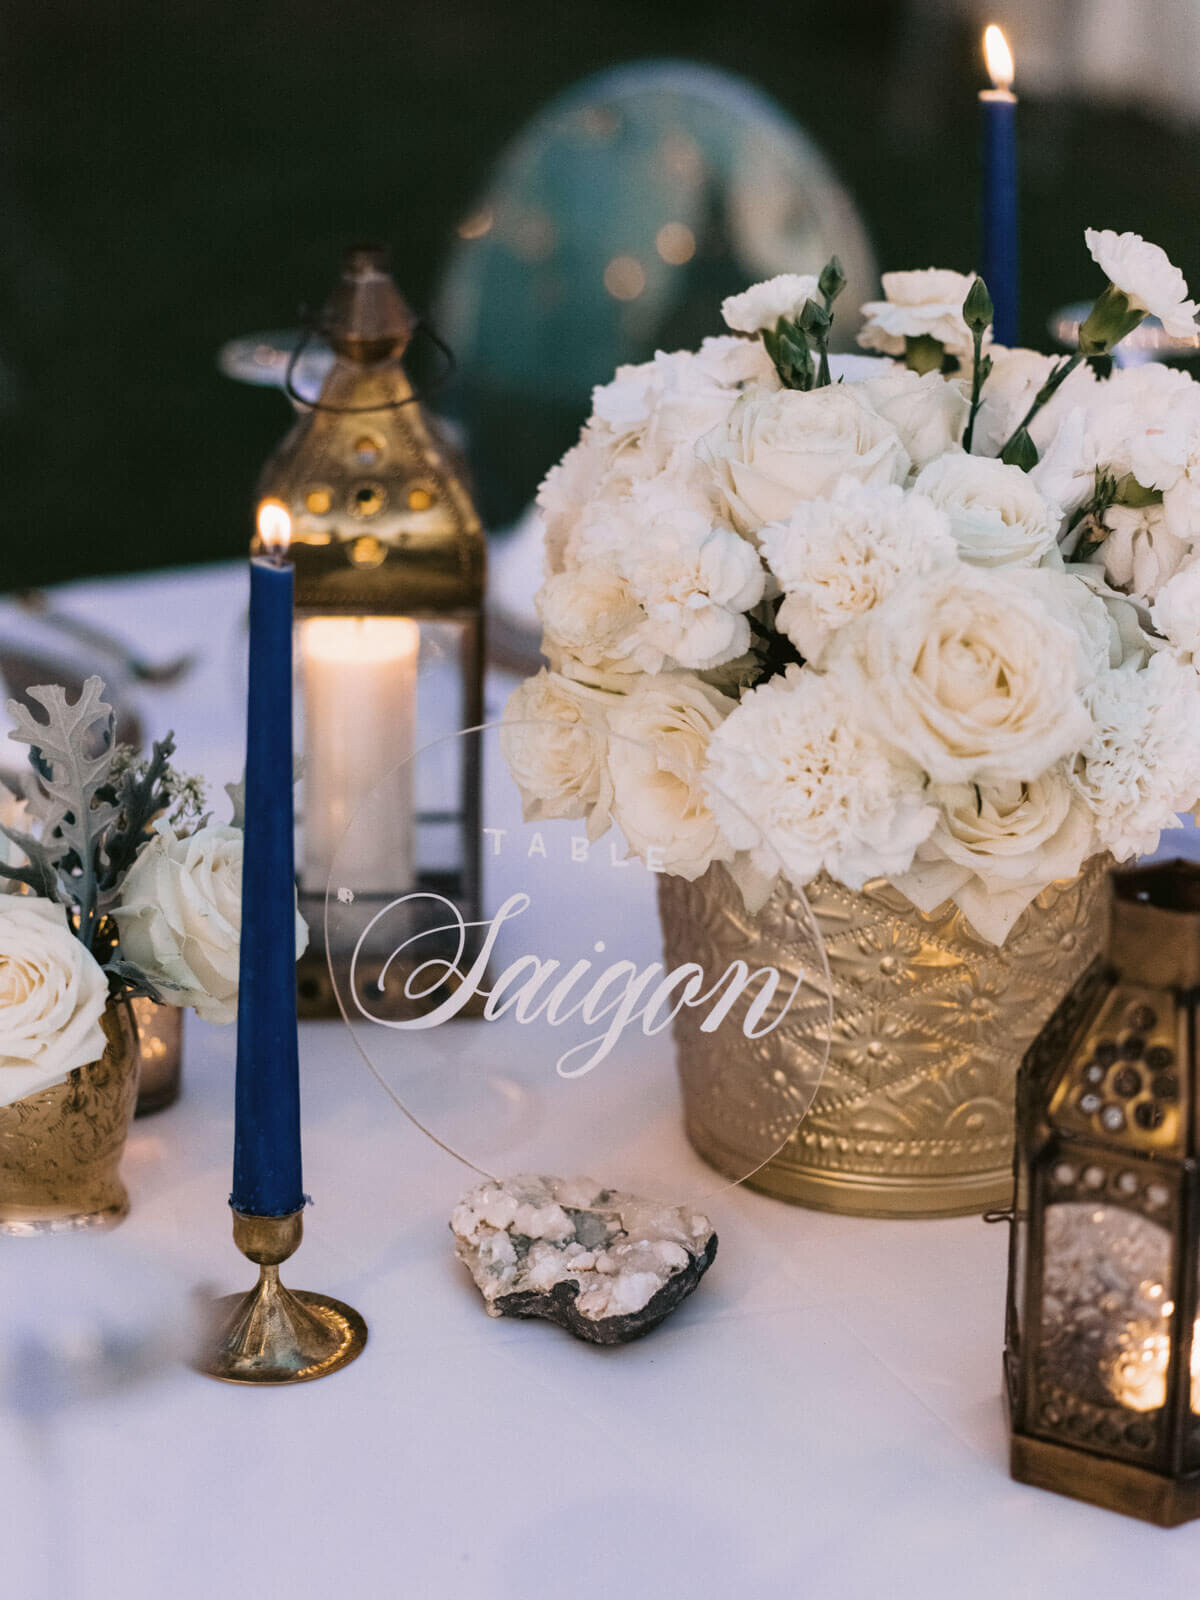 A table centerpiece of white flowers and candles on copper antique wares for a wedding in Khayangan Estate, Indonesia. Image by Jenny Fu Studio